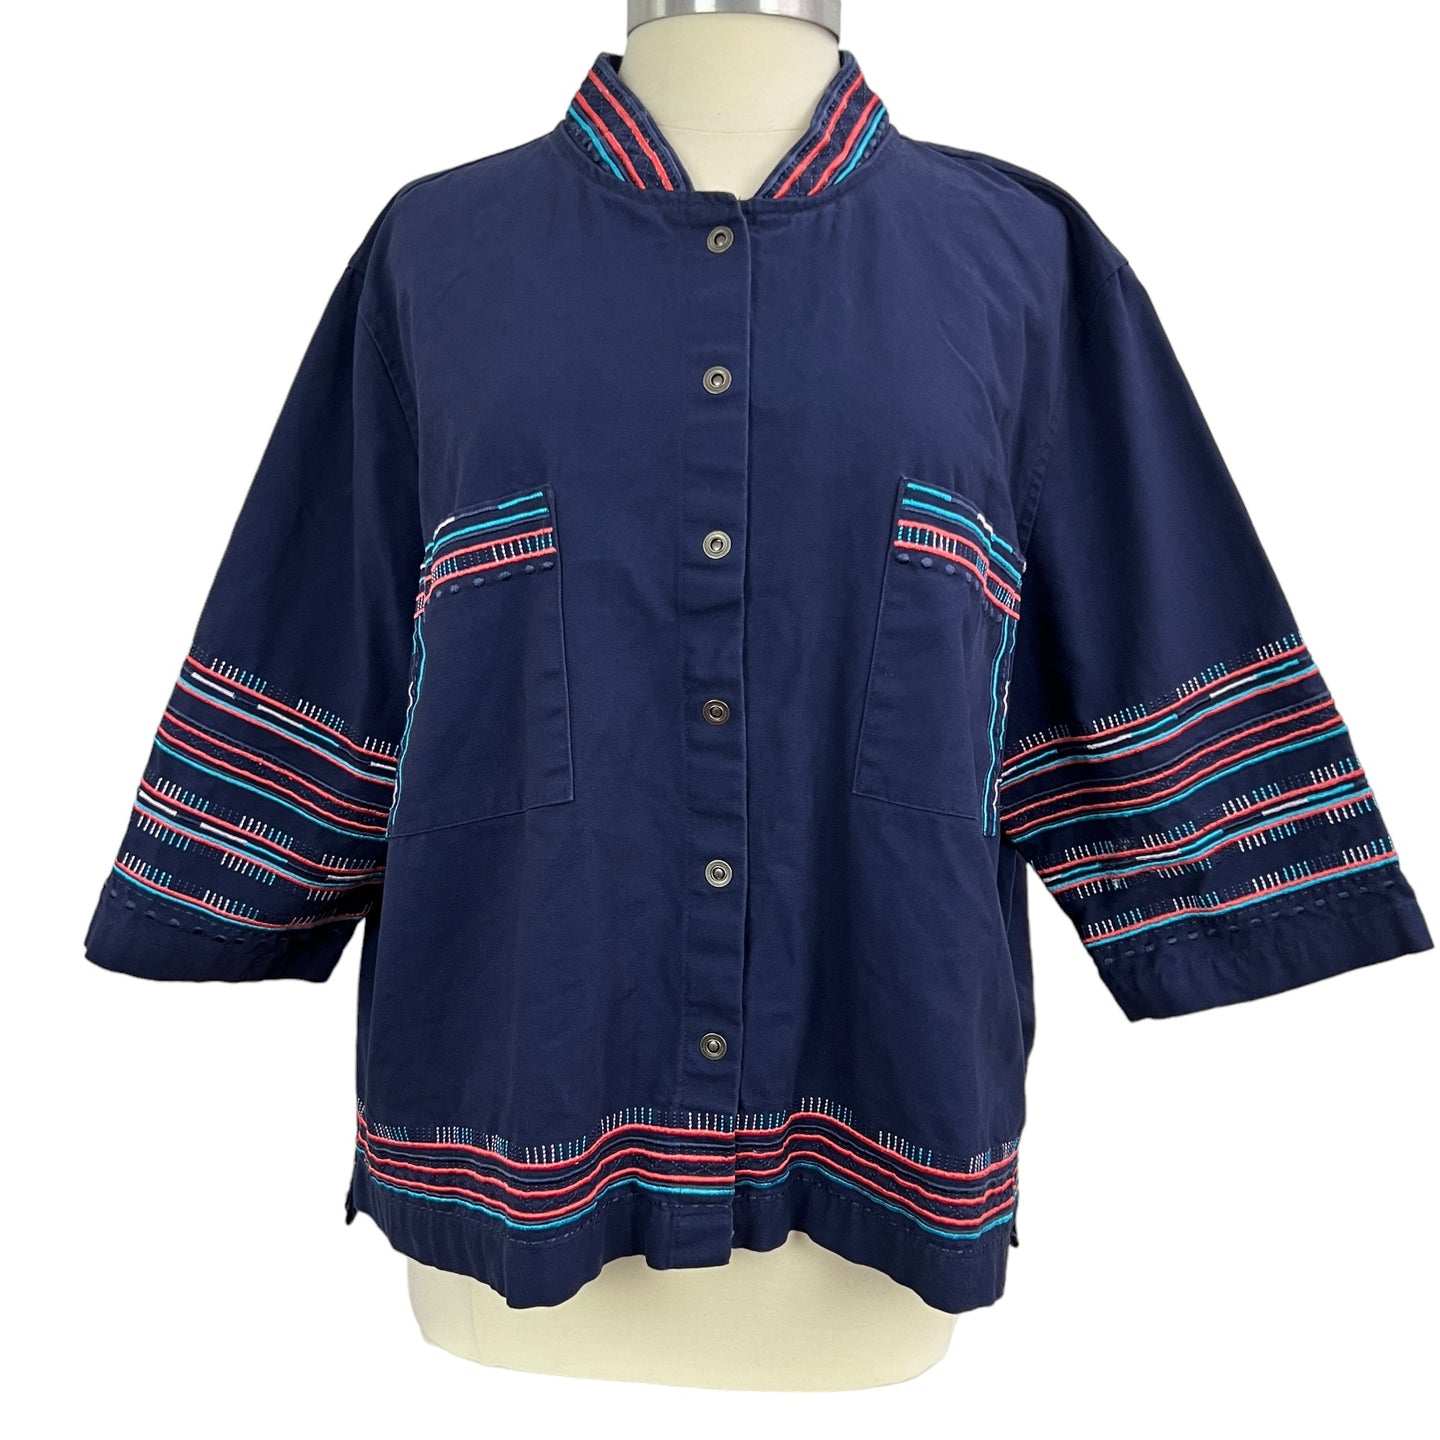 Embroidered Navy Blue Shirt Jacket Size 2X